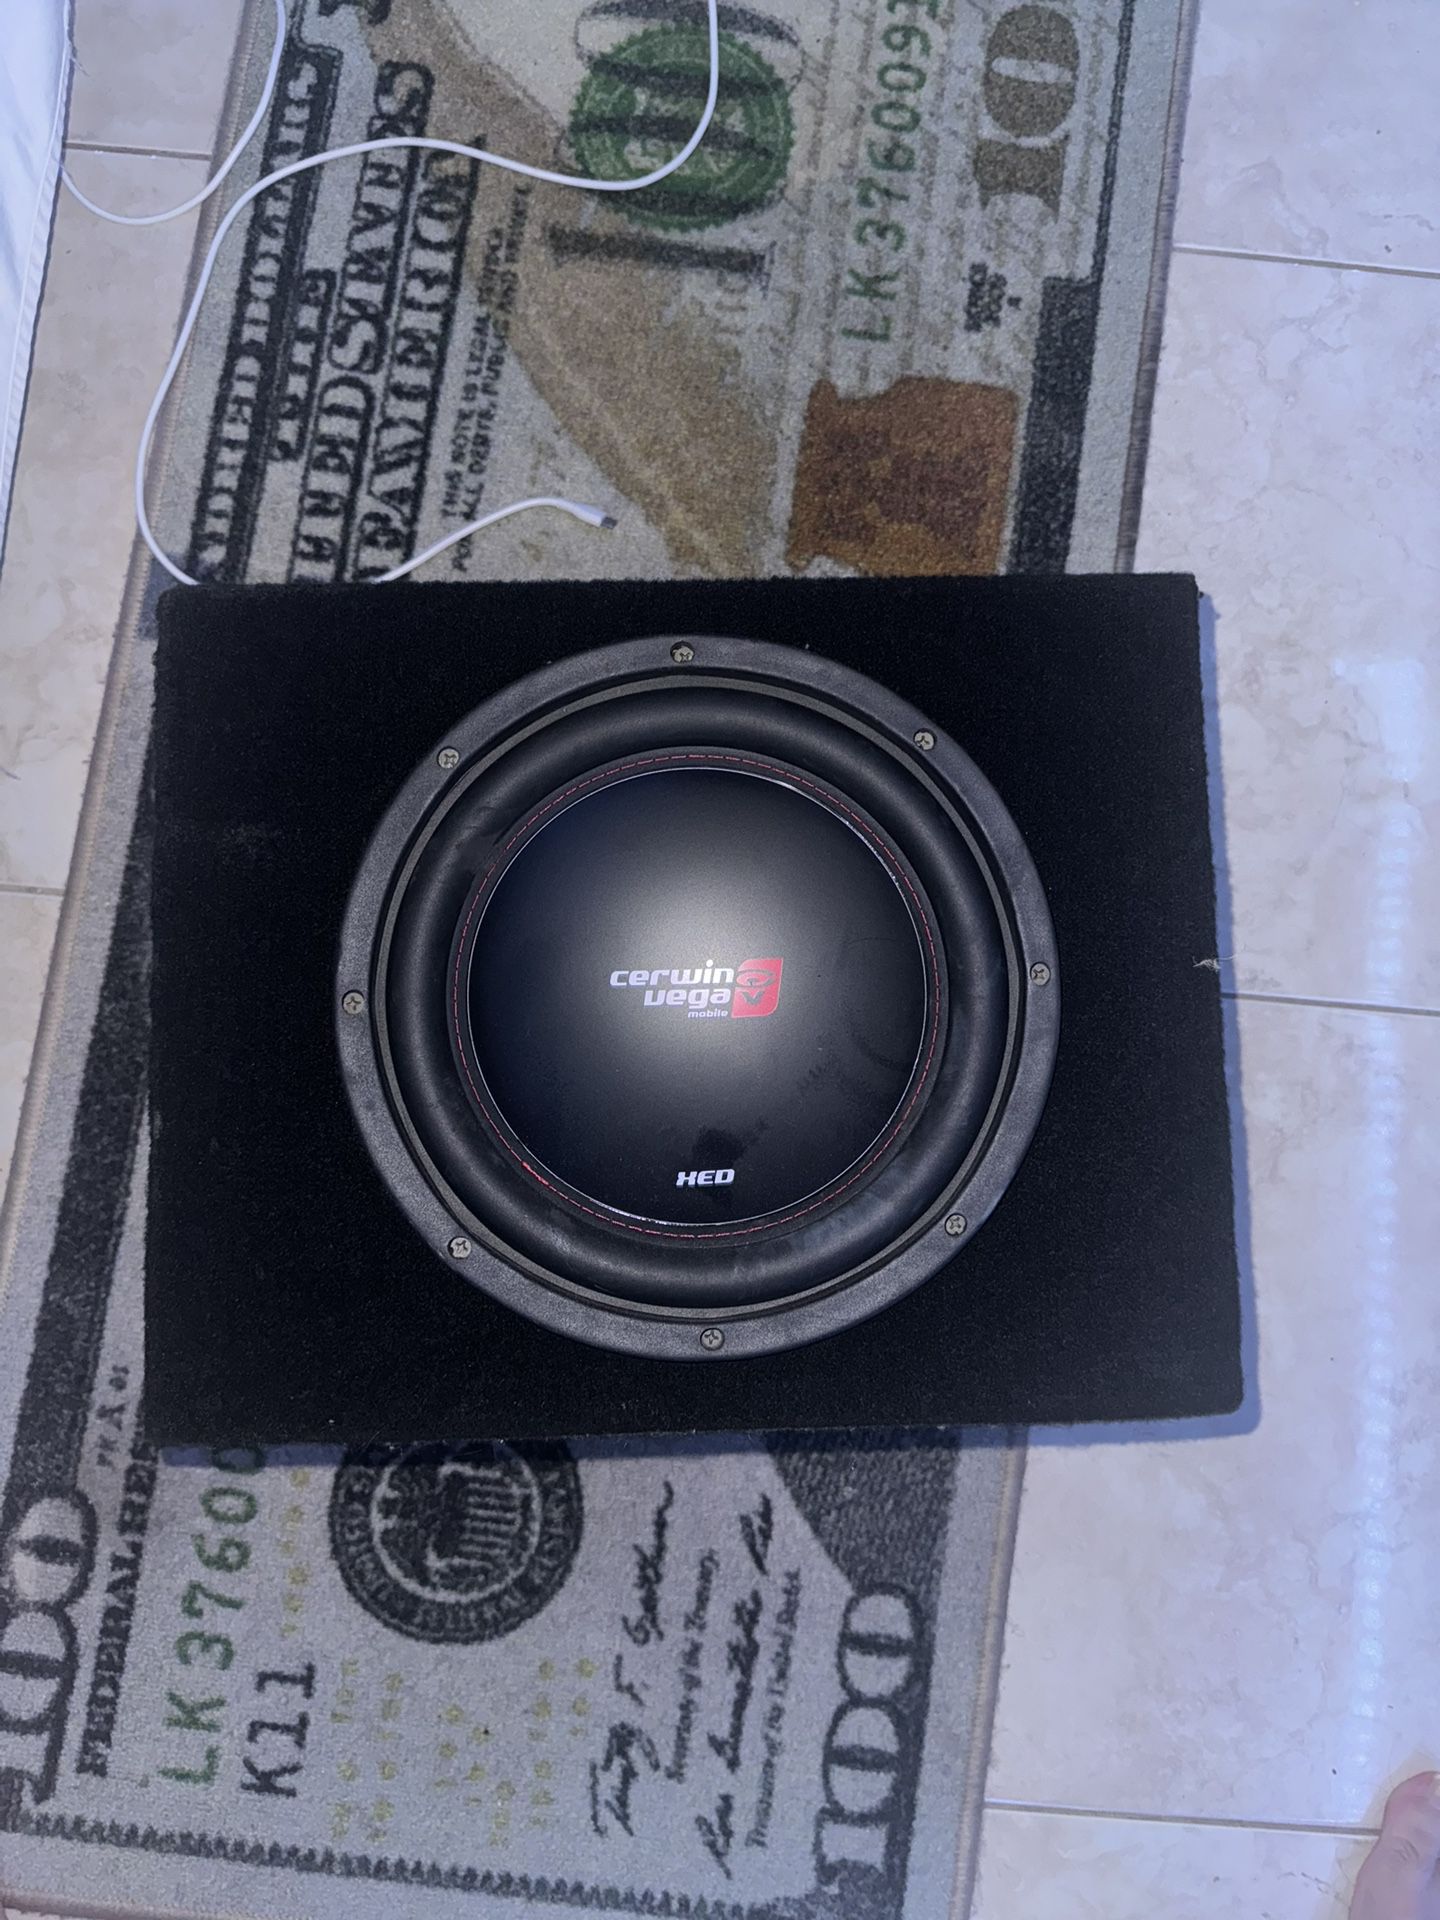 10” Subwoofer and Amp